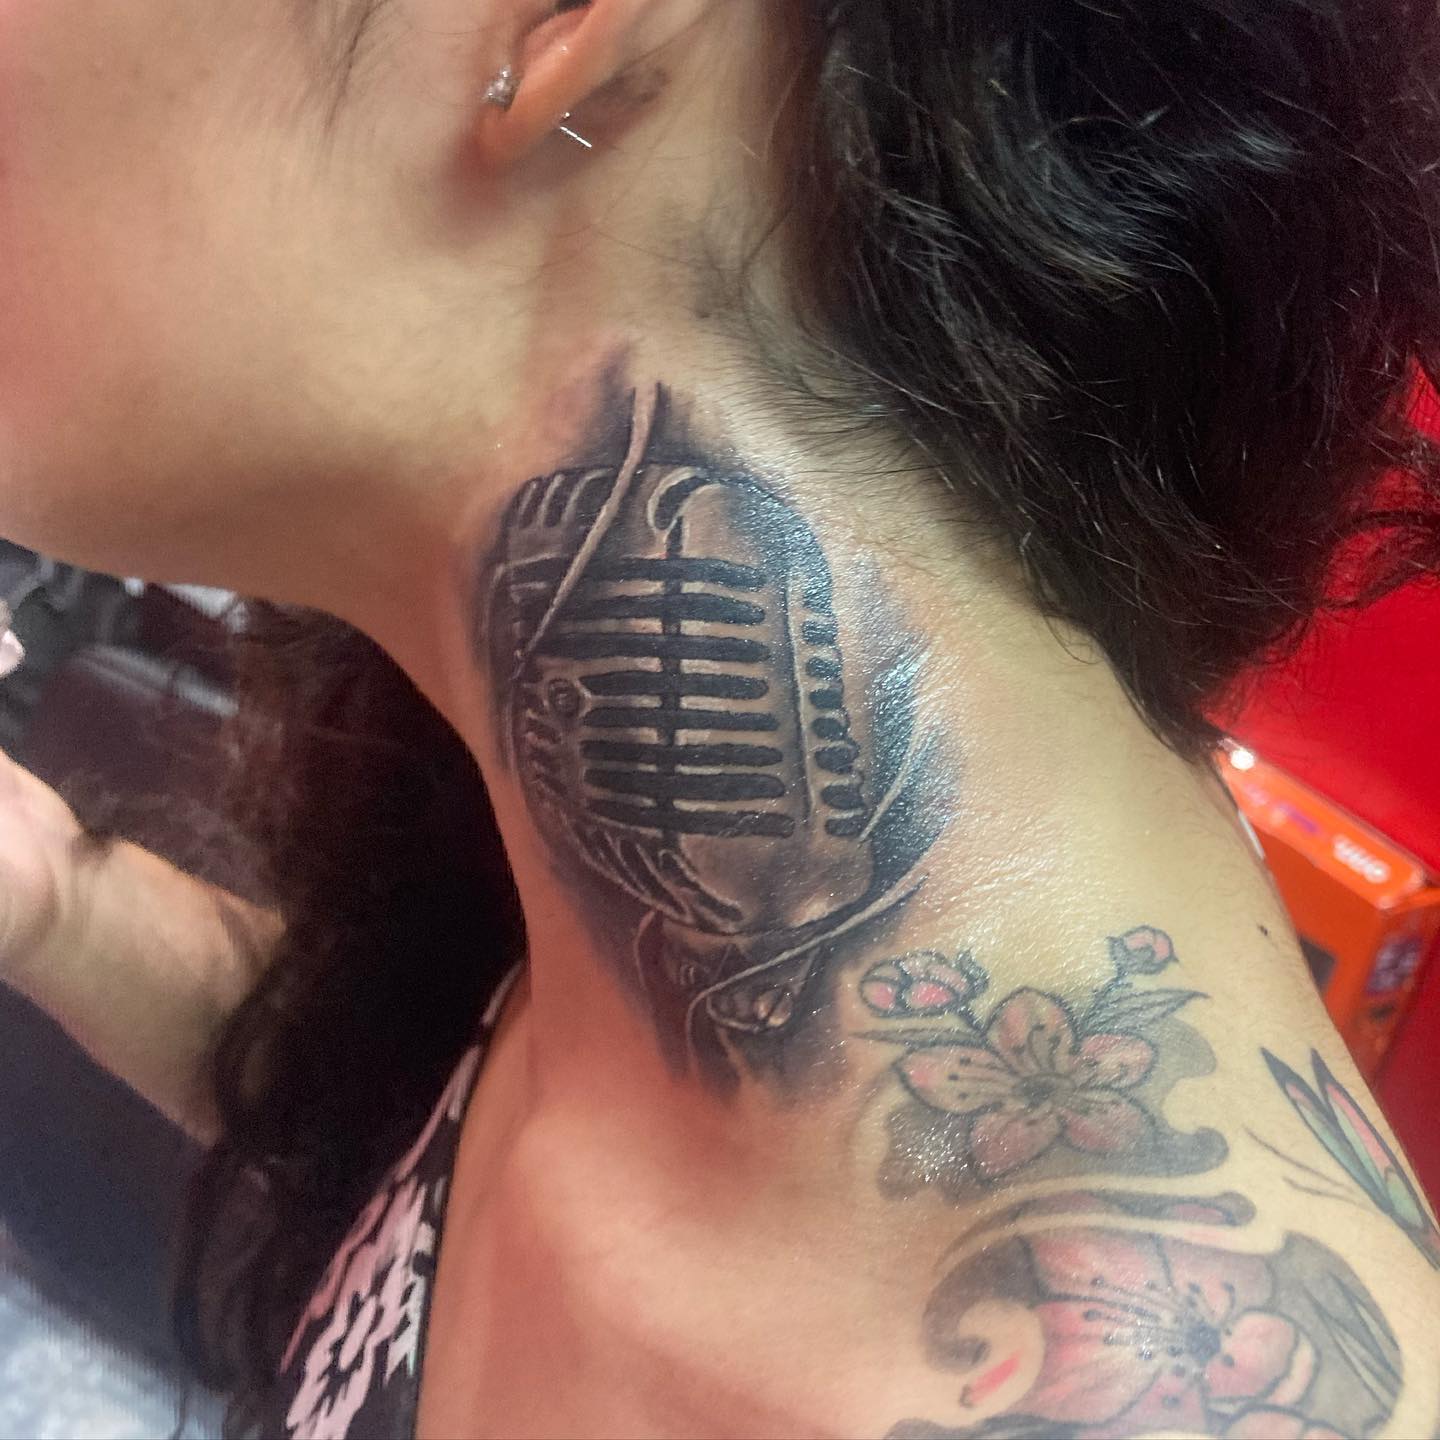 This old school microphone tattoo on your neck will inform everyone that you are a pure singer.